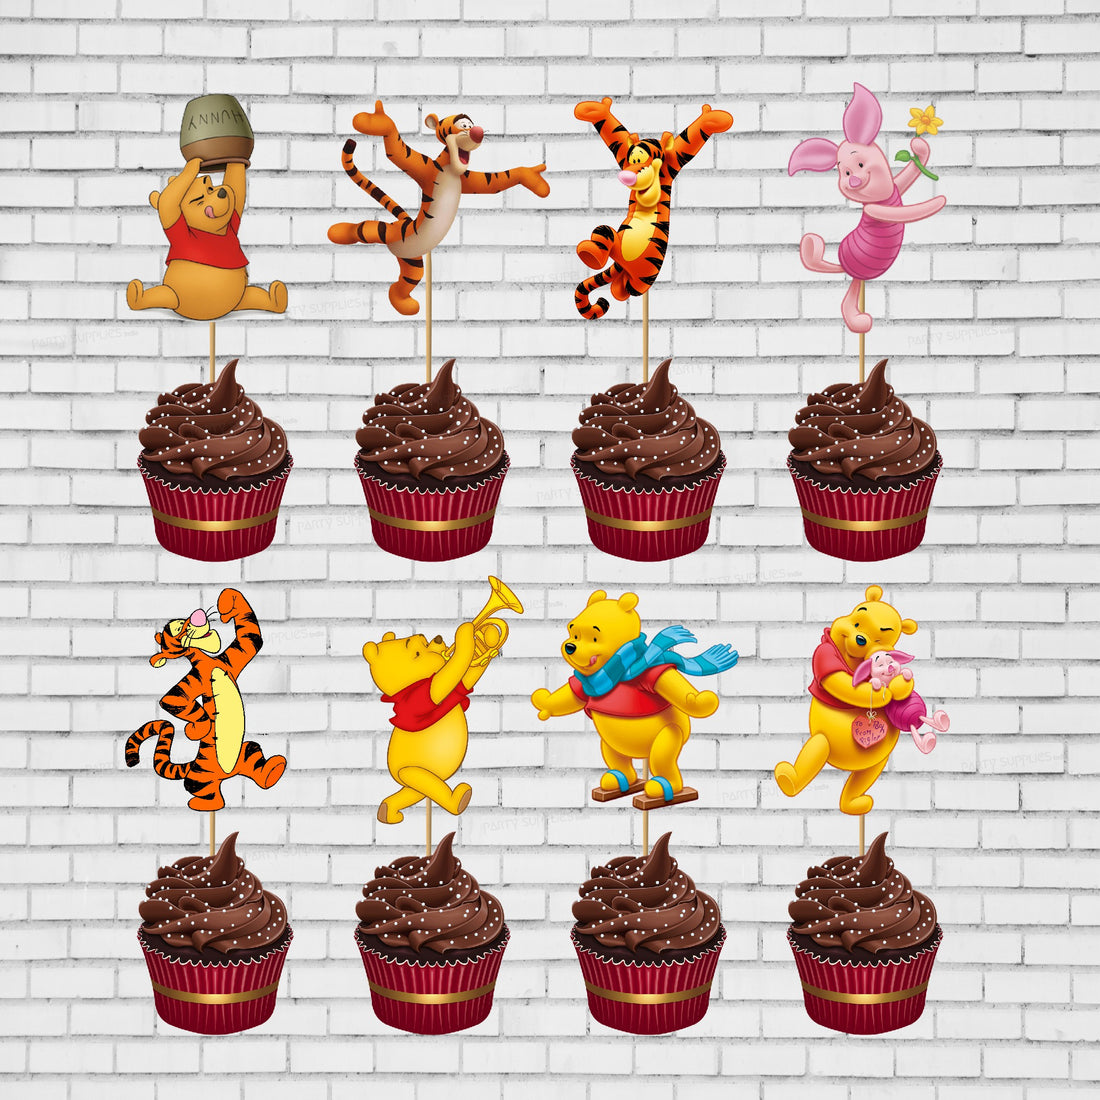 PSI Winnie the Pooh Theme Cup Cake Topper